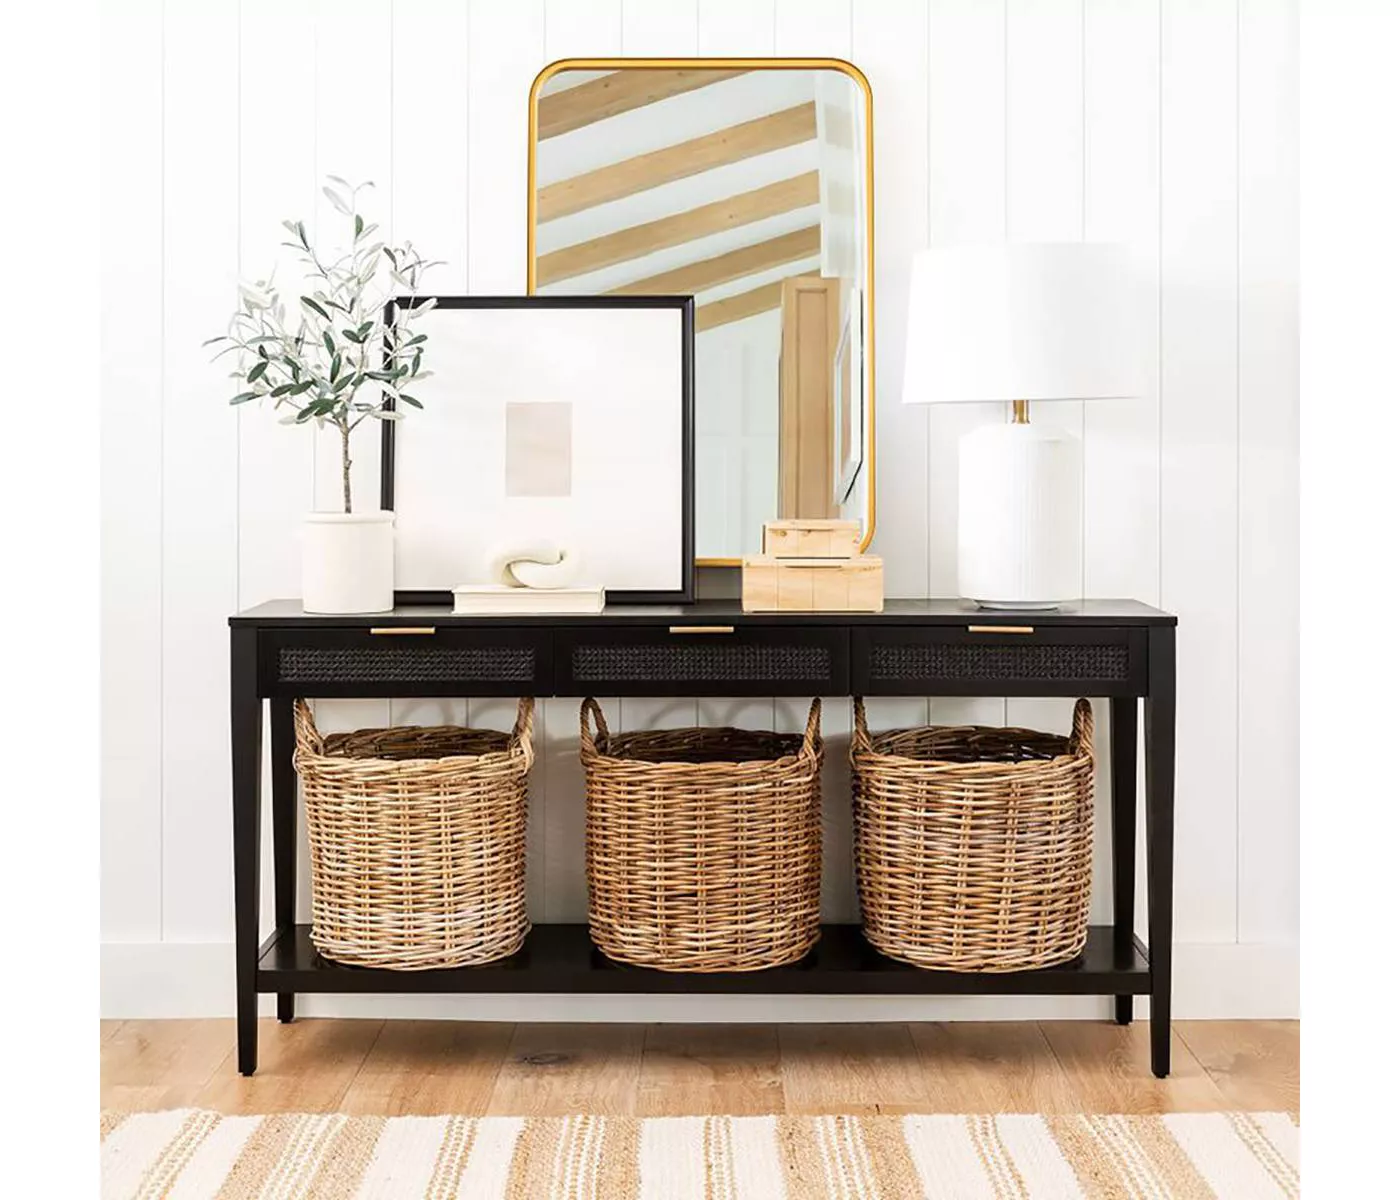 studio mcgee for target: new collection